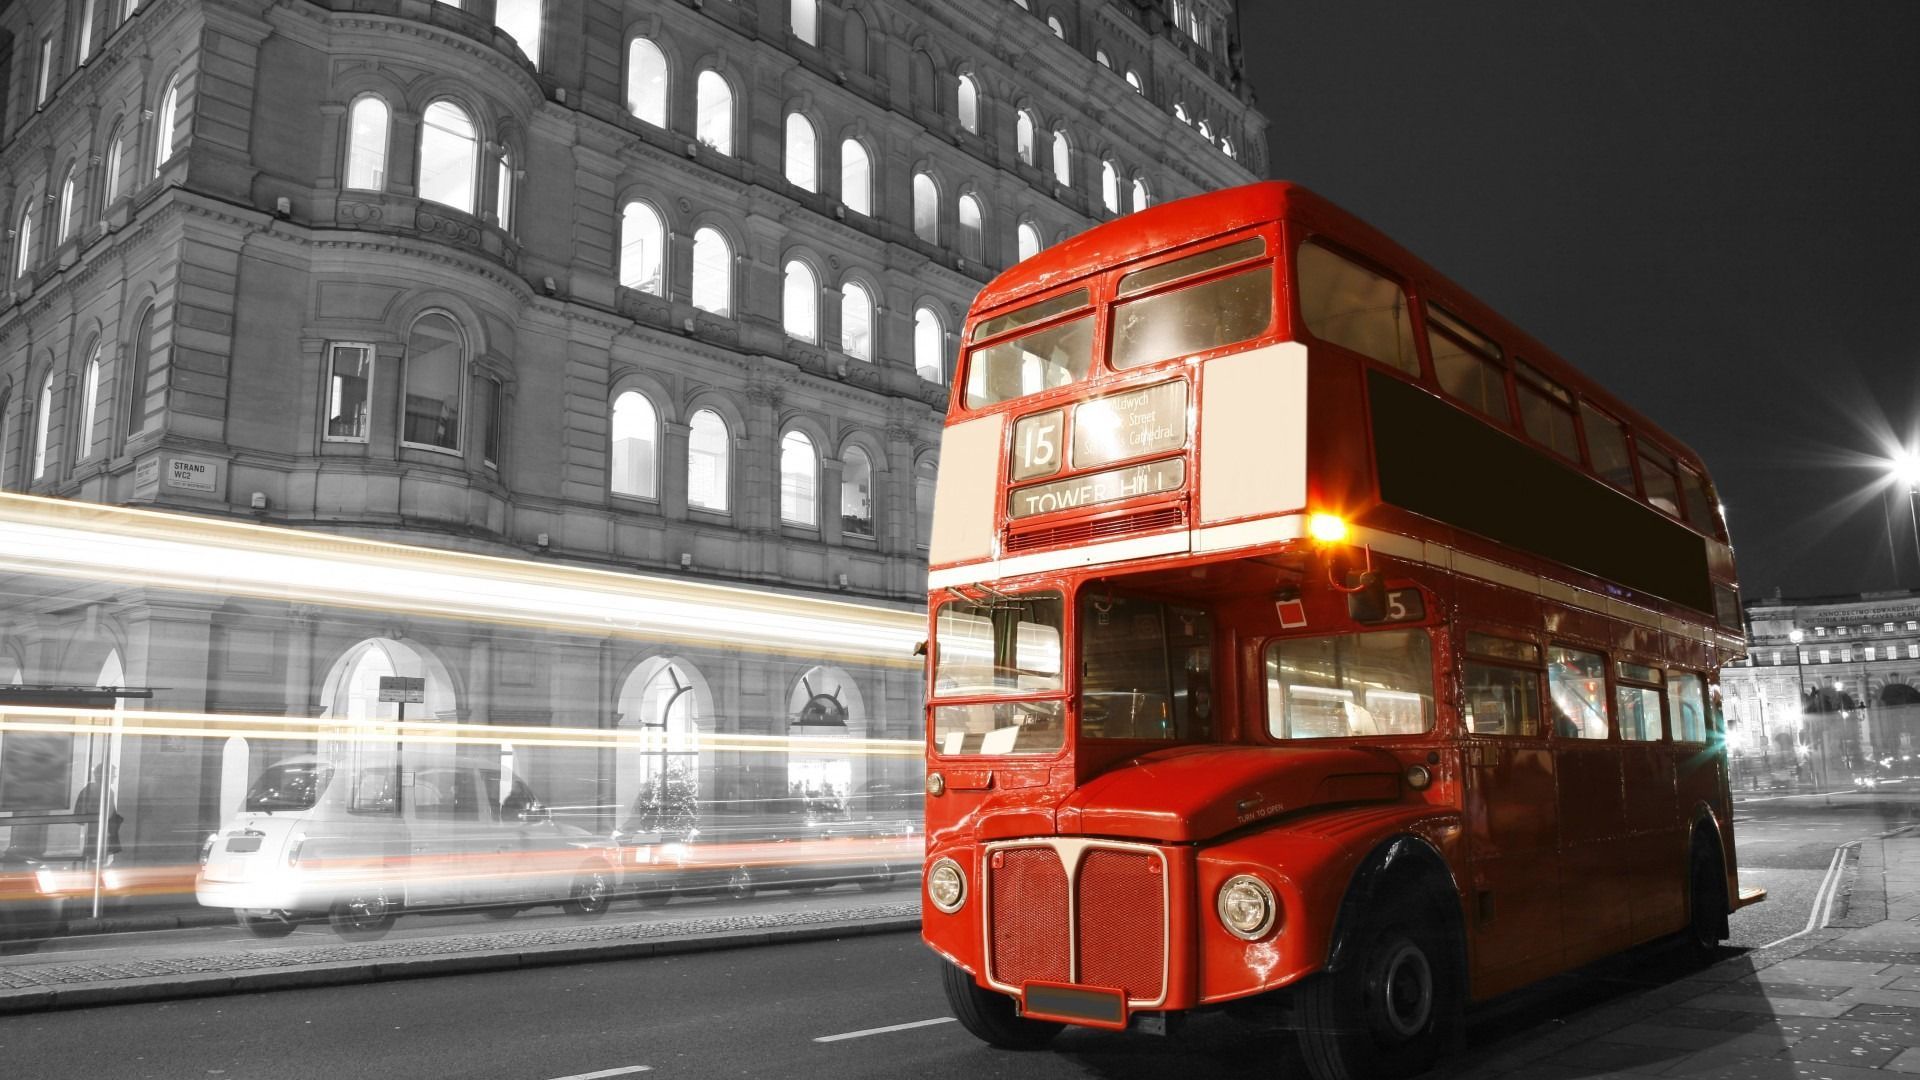 London Bus 1920 x 1080 Wallpaper. London wallpaper, London bus, London red bus